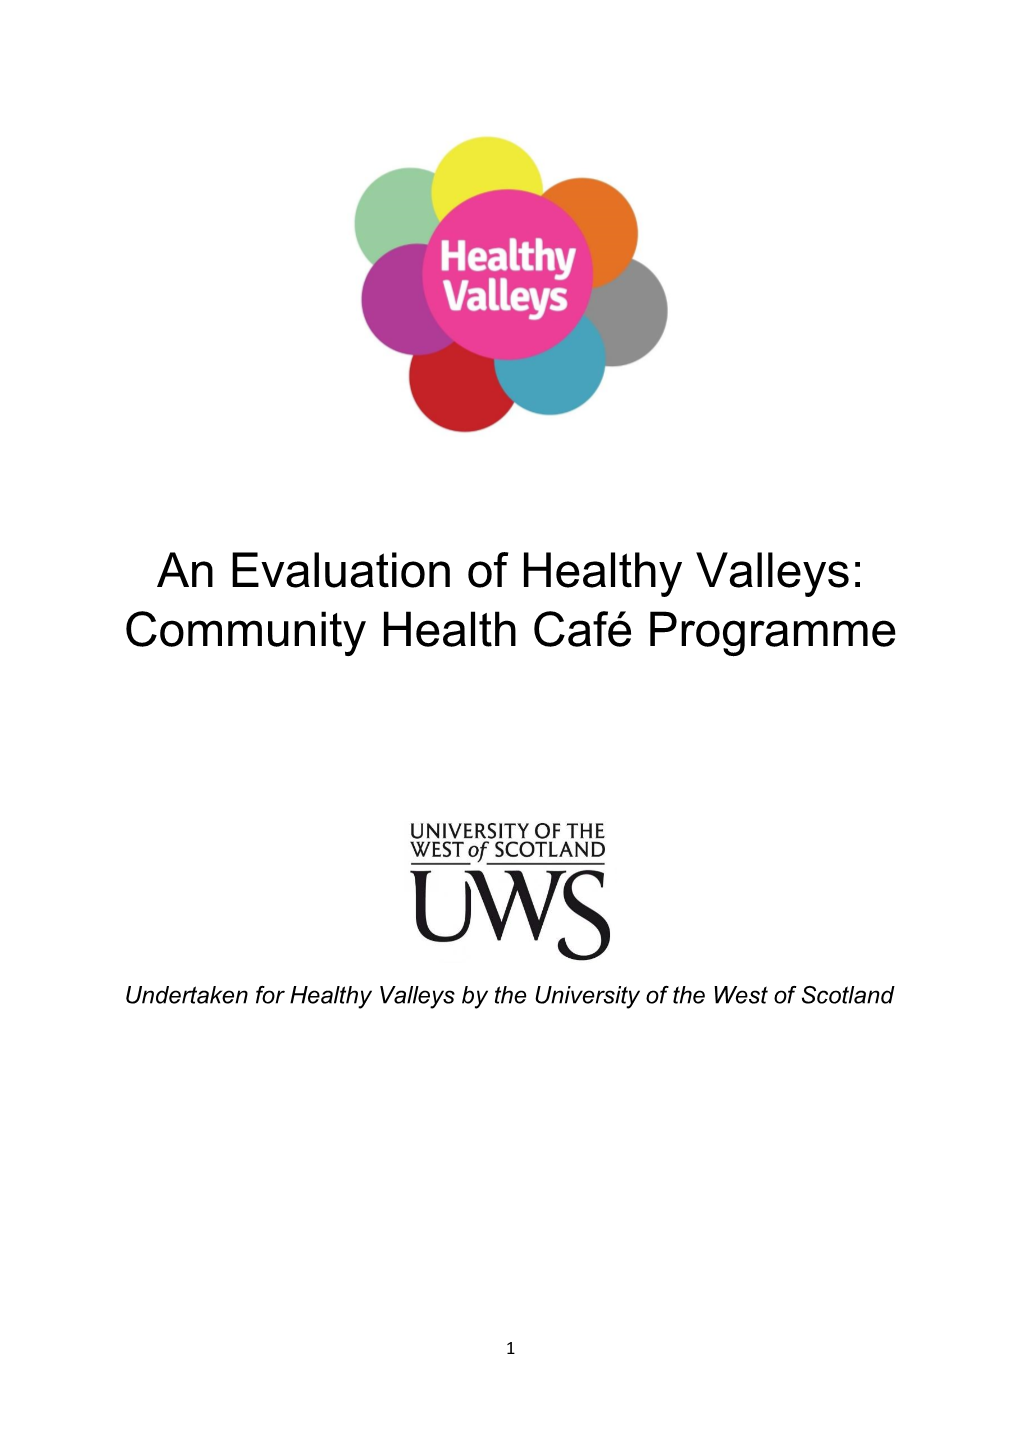 An Evaluation of Healthy Valleys: Community Health Café Programme